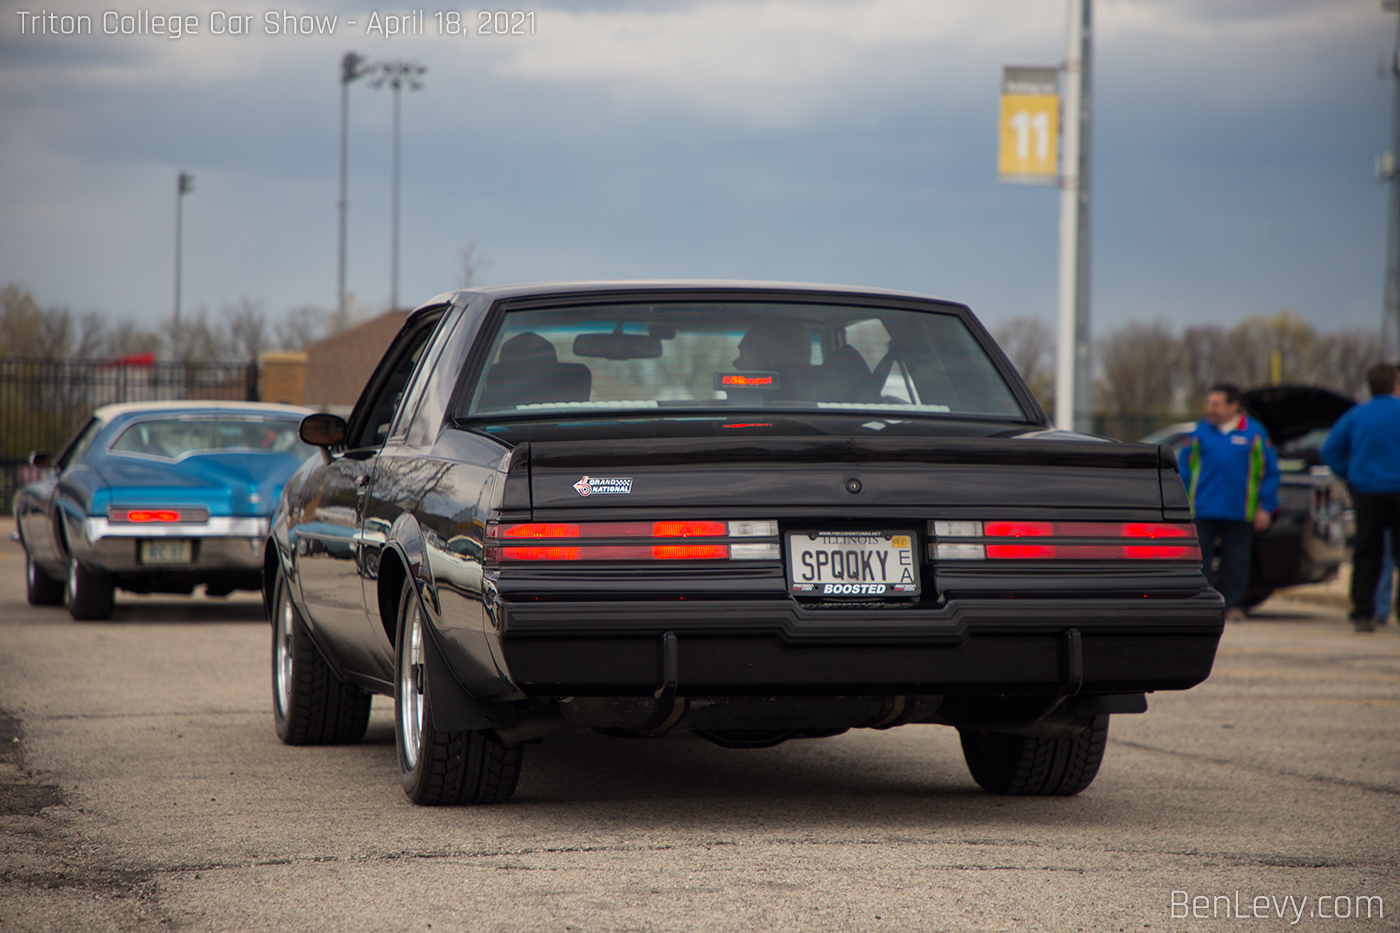 Buick Grand National at Triton College Car Show